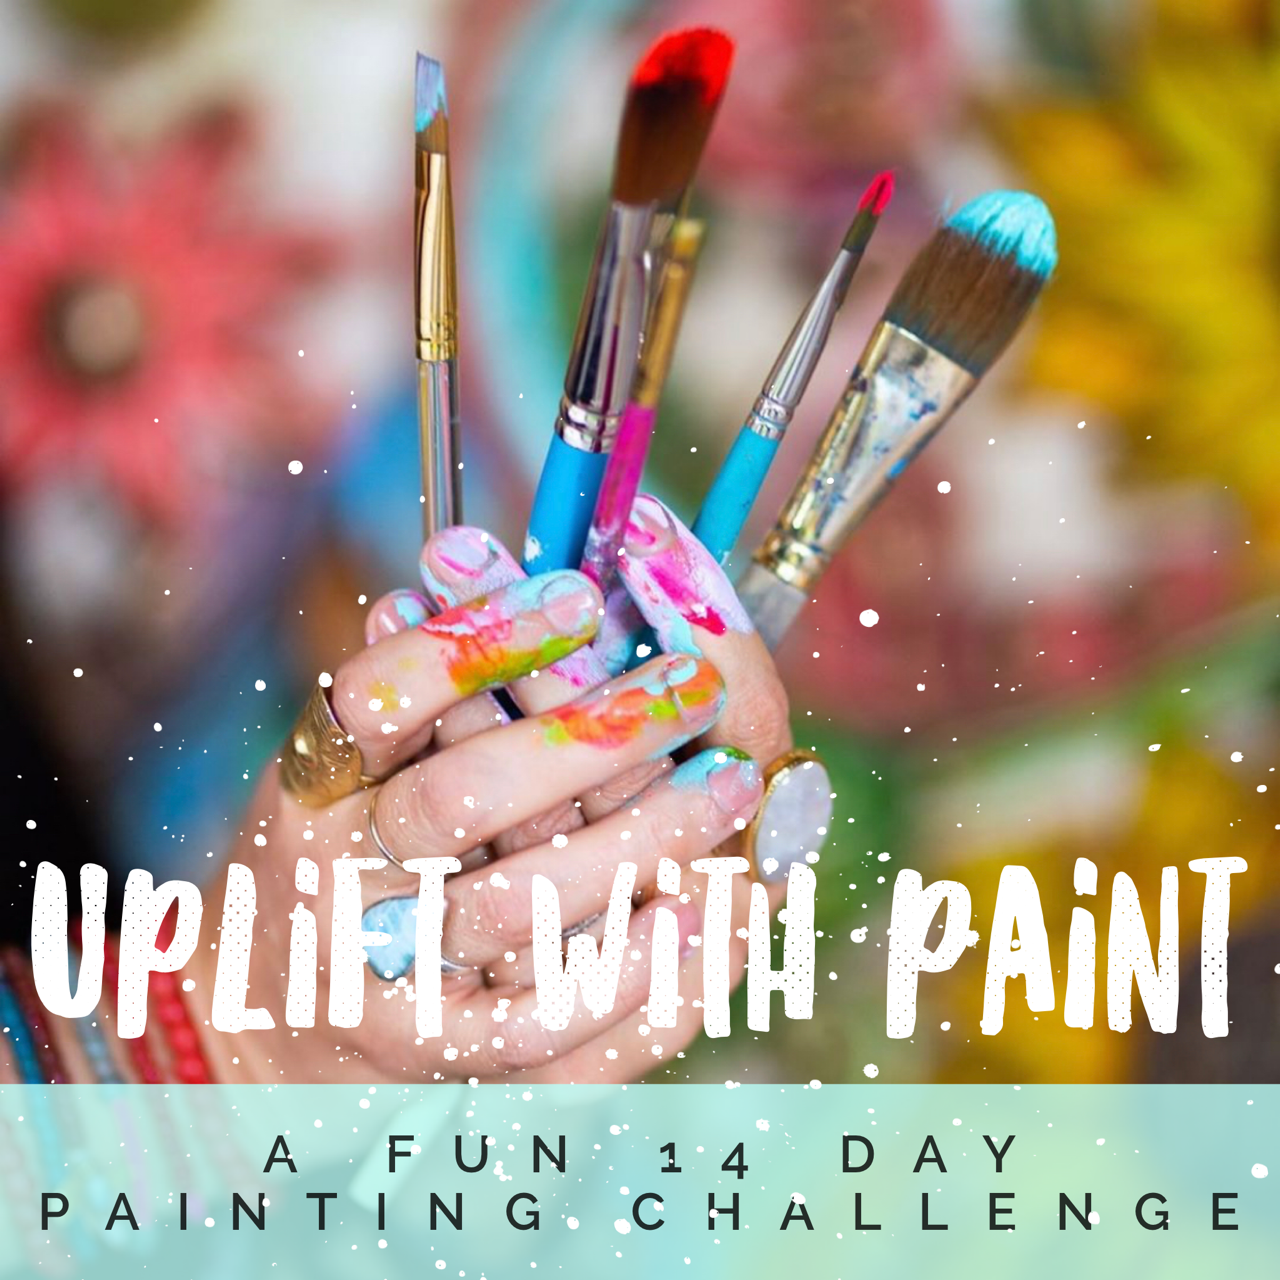 The Anything But A Paintbrush Challenge